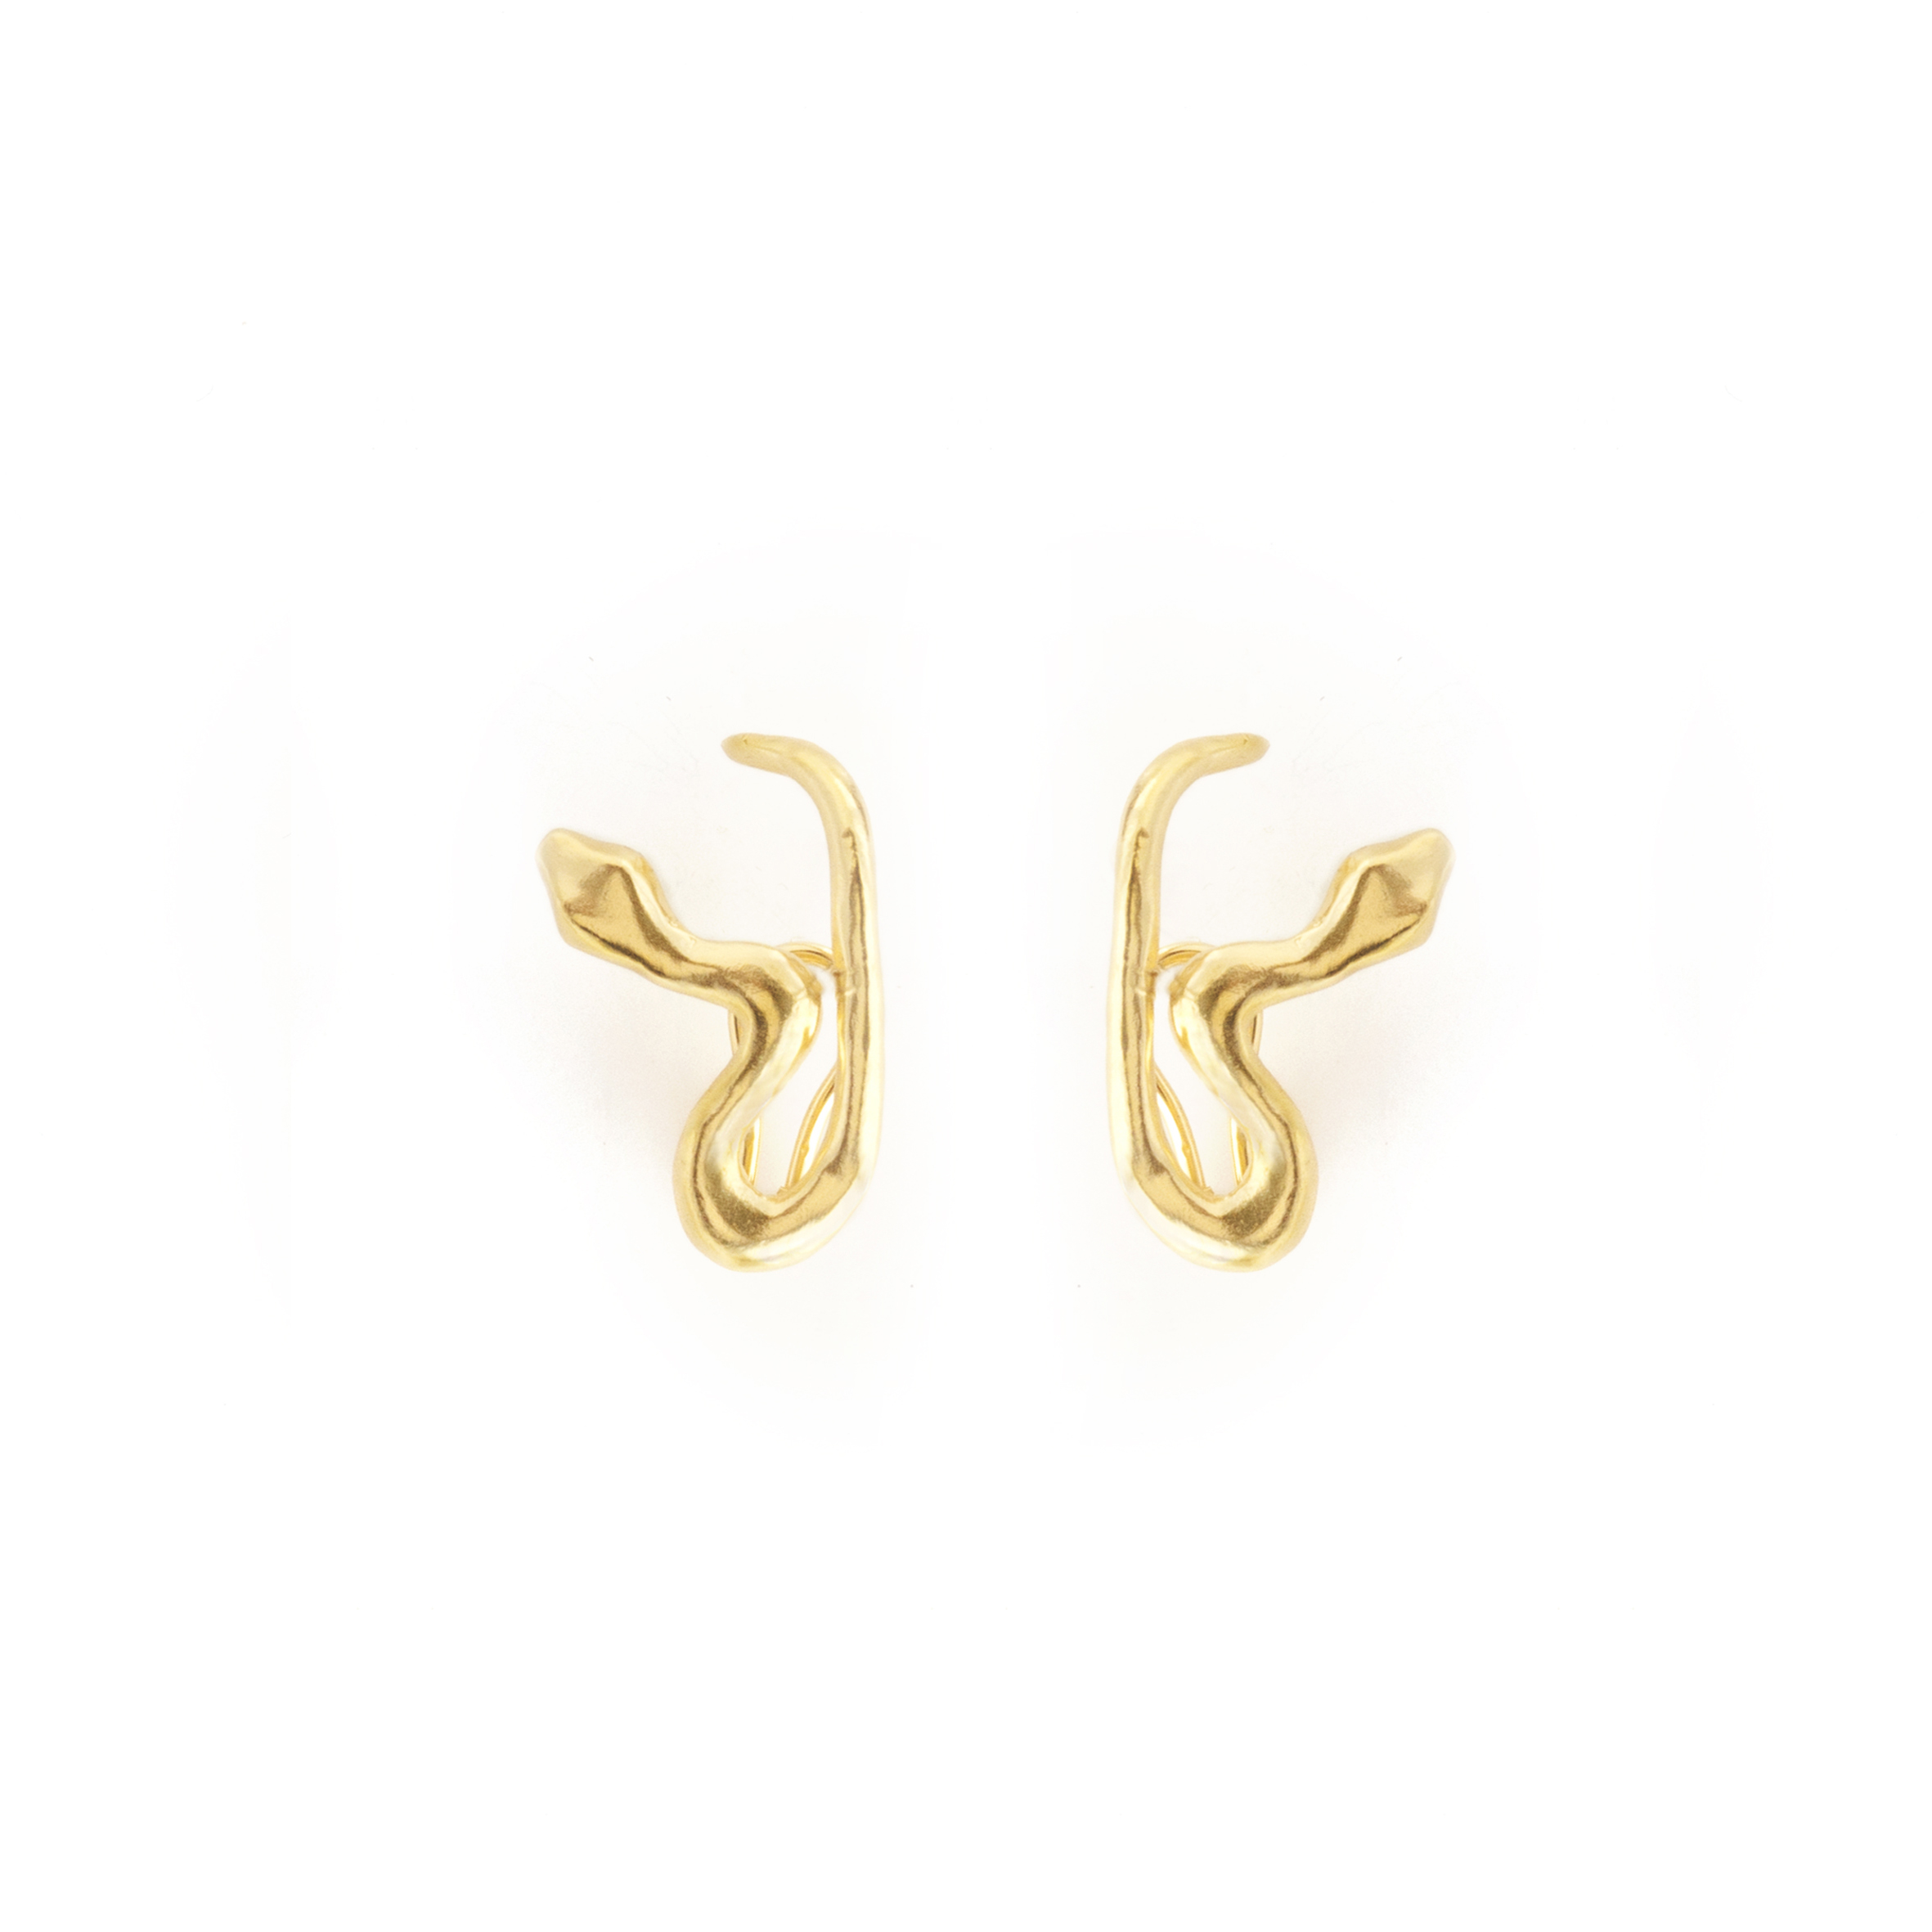 BODY_tail earrings gold plated bronze